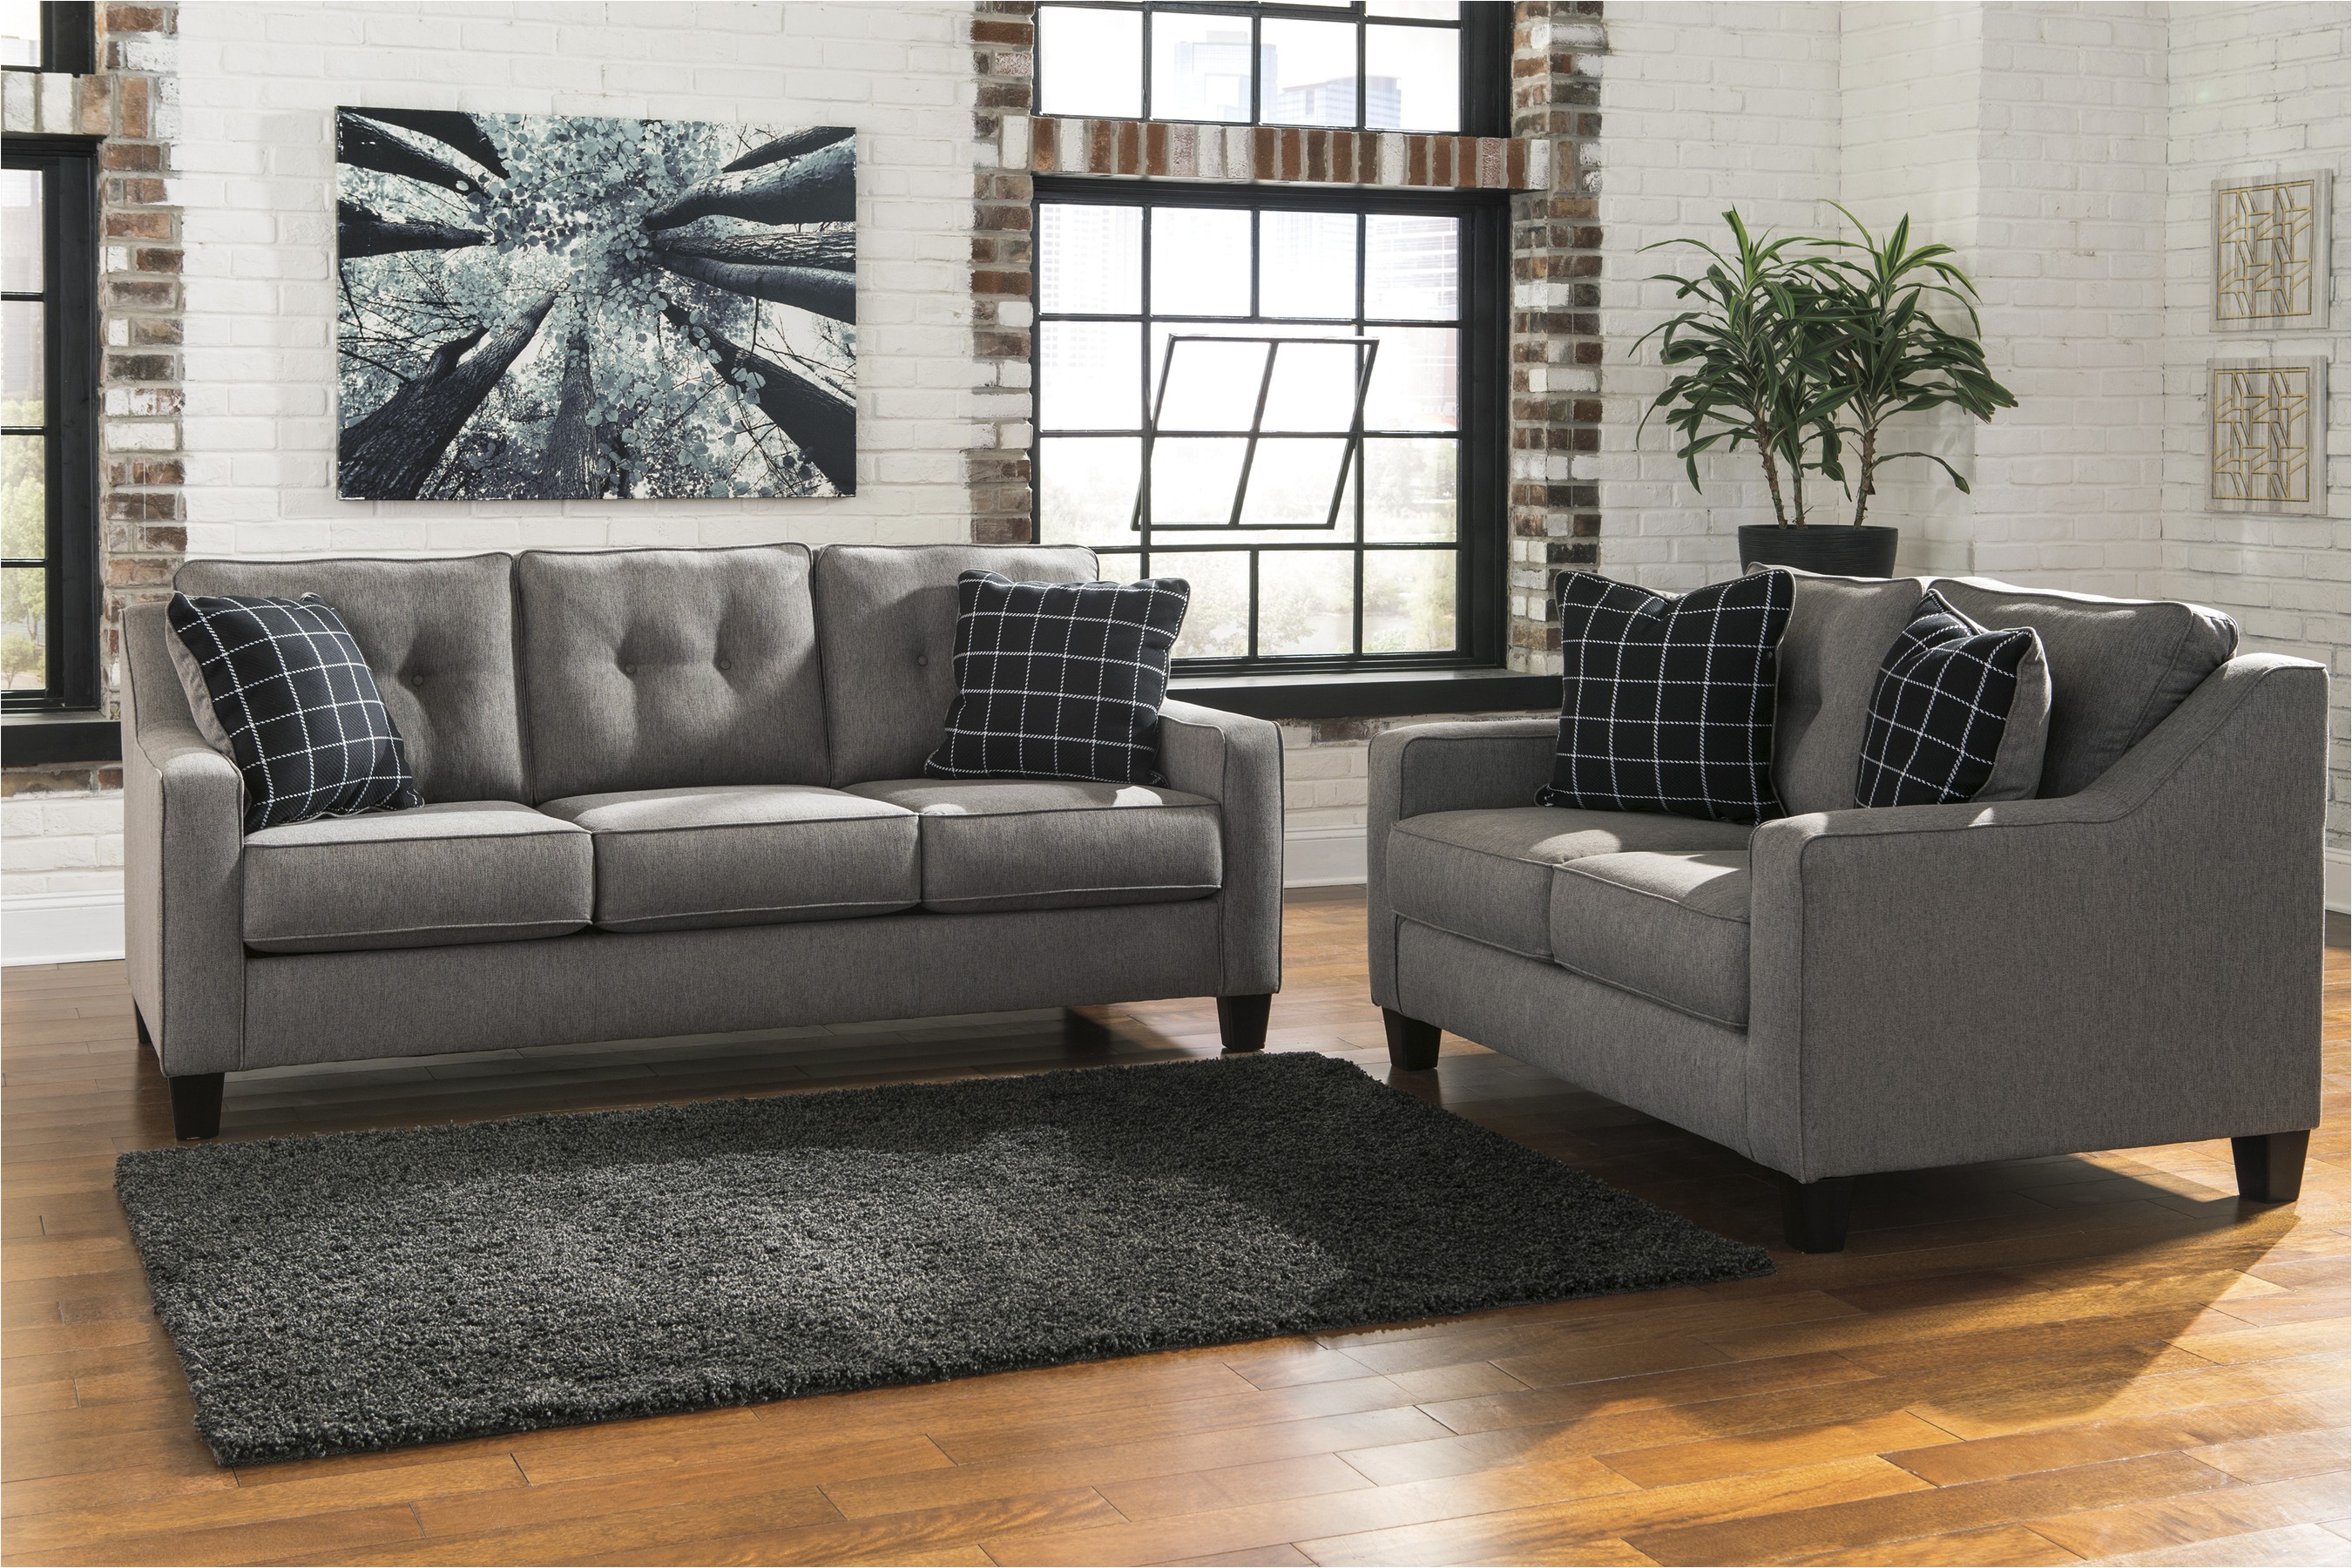 Leather sofas at Big Lots Amazing Images Of Simmons Couch Big Lots Best Home Design Ideas